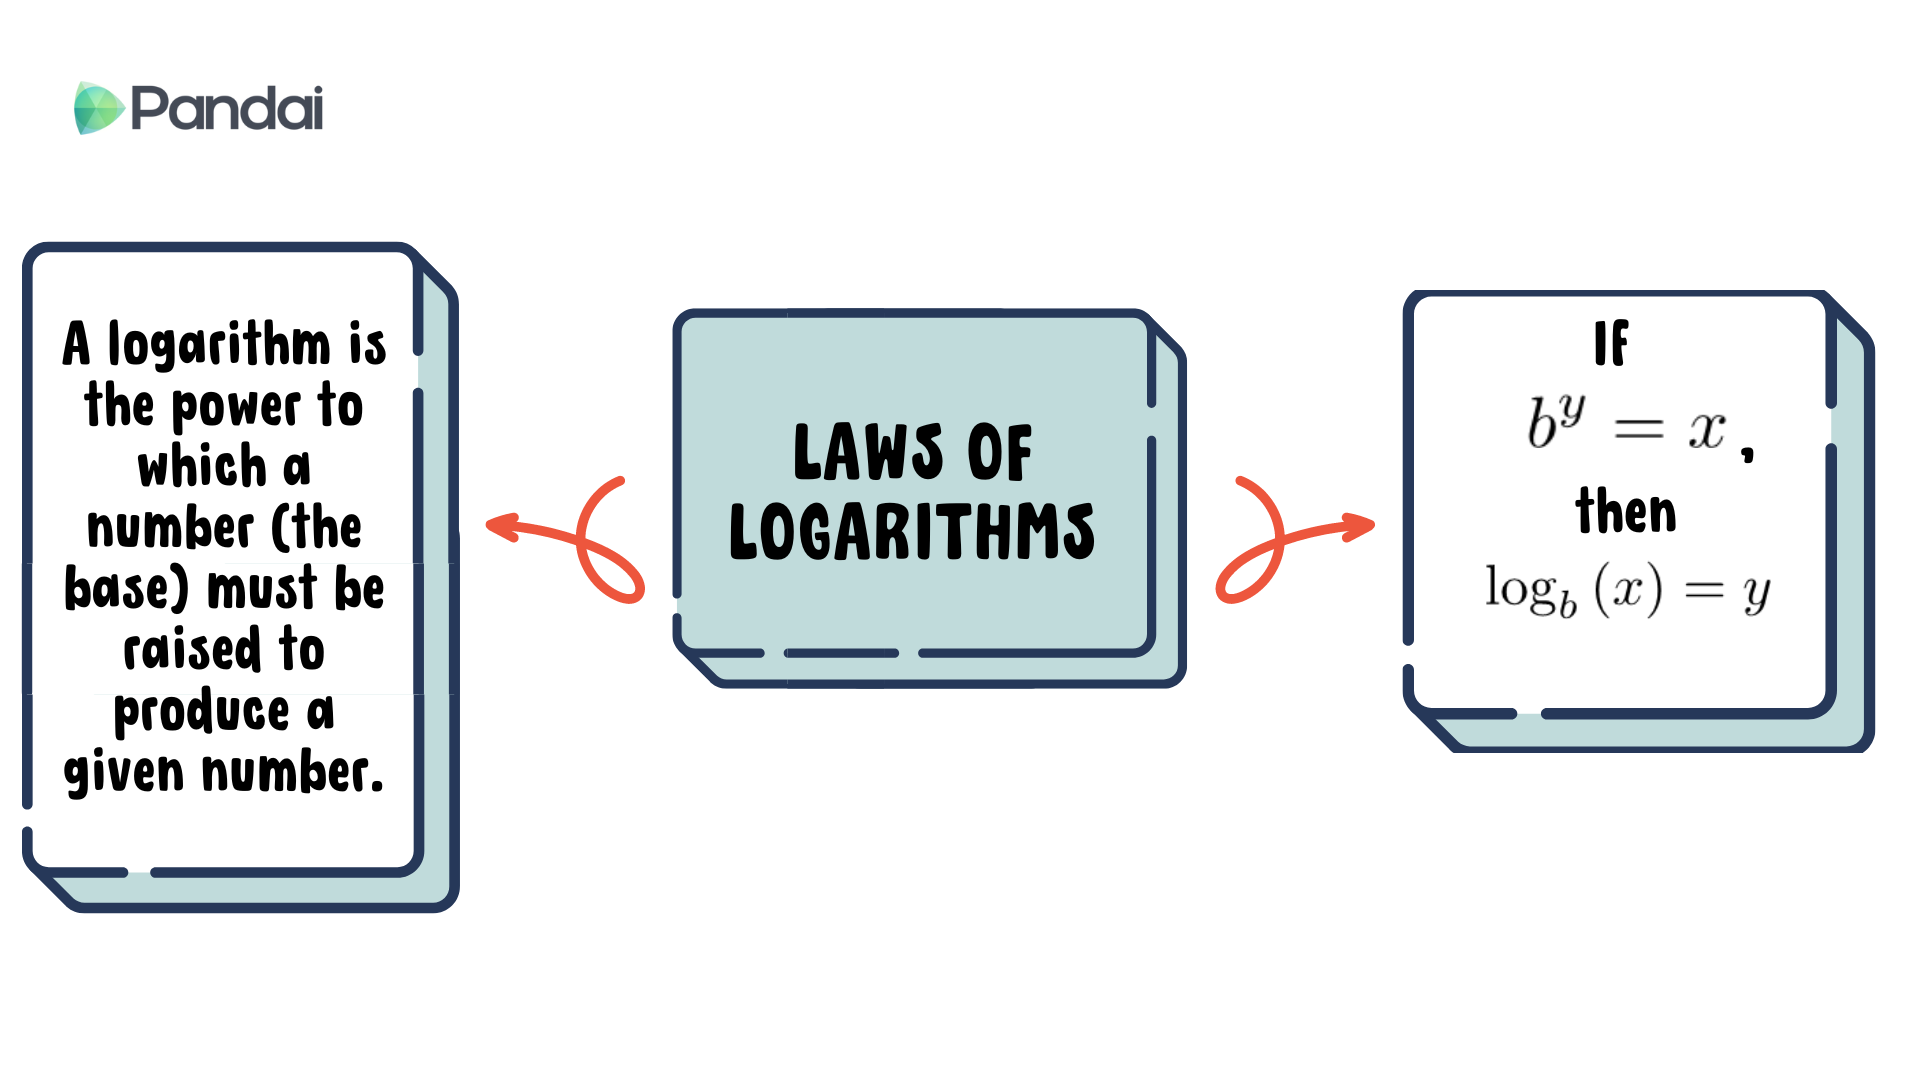 The image is a visual representation of logarithms. It consists of three main sections. 1. The left section contains a text box with the definition of a logarithm: ‘A logarithm is the power to which a number (the base) must be raised to produce a given number.’ 2. The middle section has a title that reads ‘LAWS OF LOGARITHMS.’ 3. The right section shows a mathematical expression: ‘IF b^y = x, then log_b(x) = y.’ Arrows connect the three sections, indicating a flow of information from the definition to the laws and then to the mathematical expression. The image has a clean and educational design.